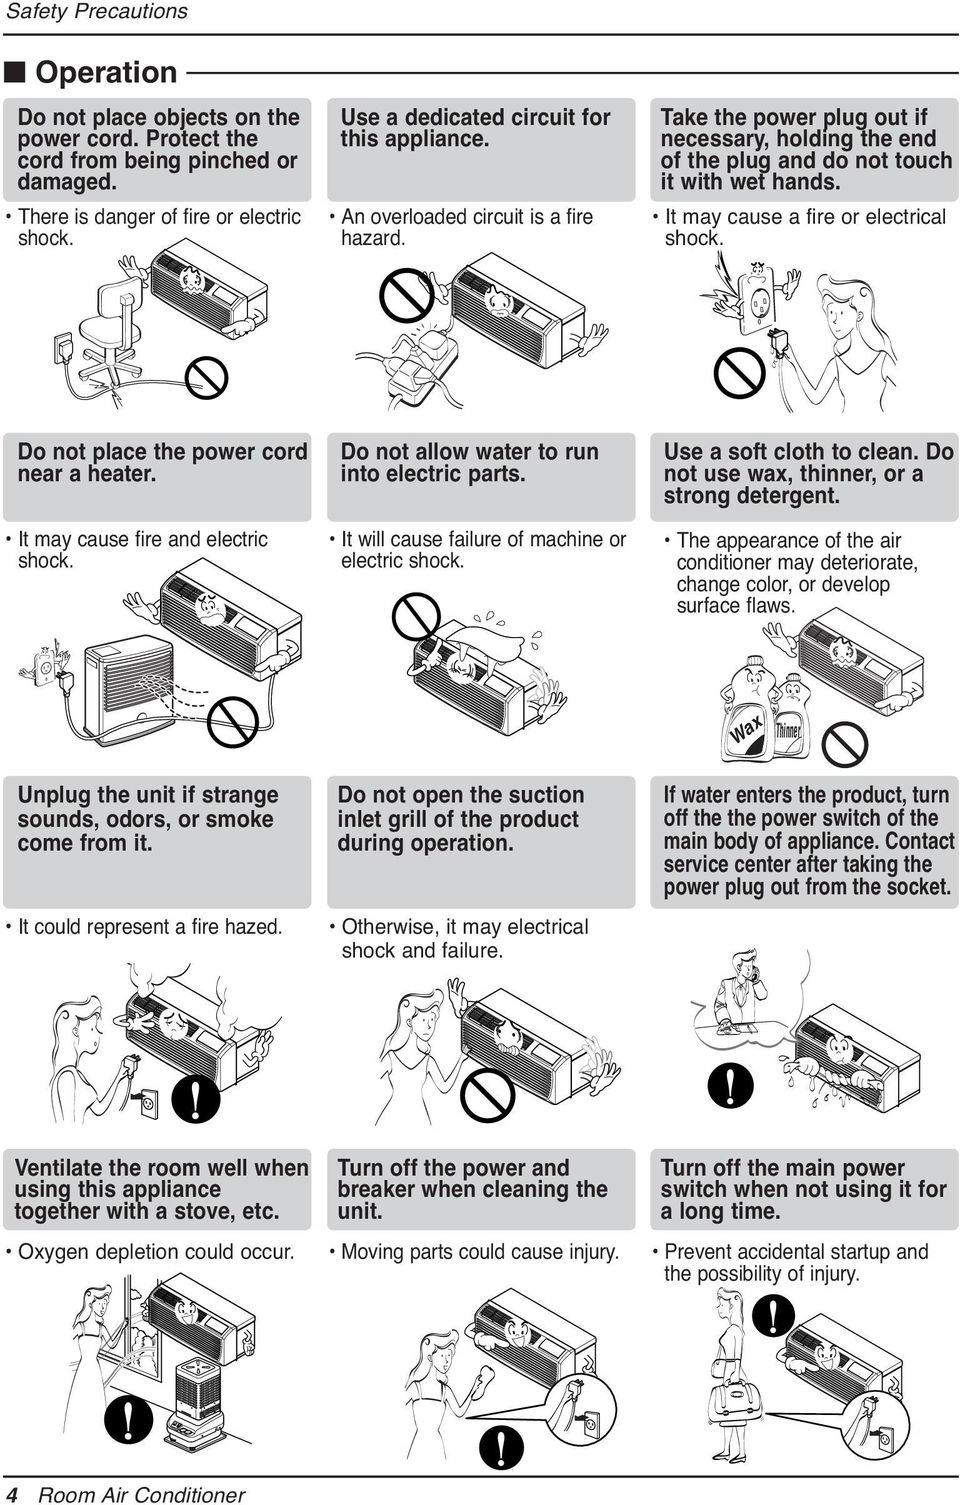 It may cause a fire or electrical shock. Do not place the power cord near a heater. It may cause fire and electric shock. Do not allow water to run into electric parts.